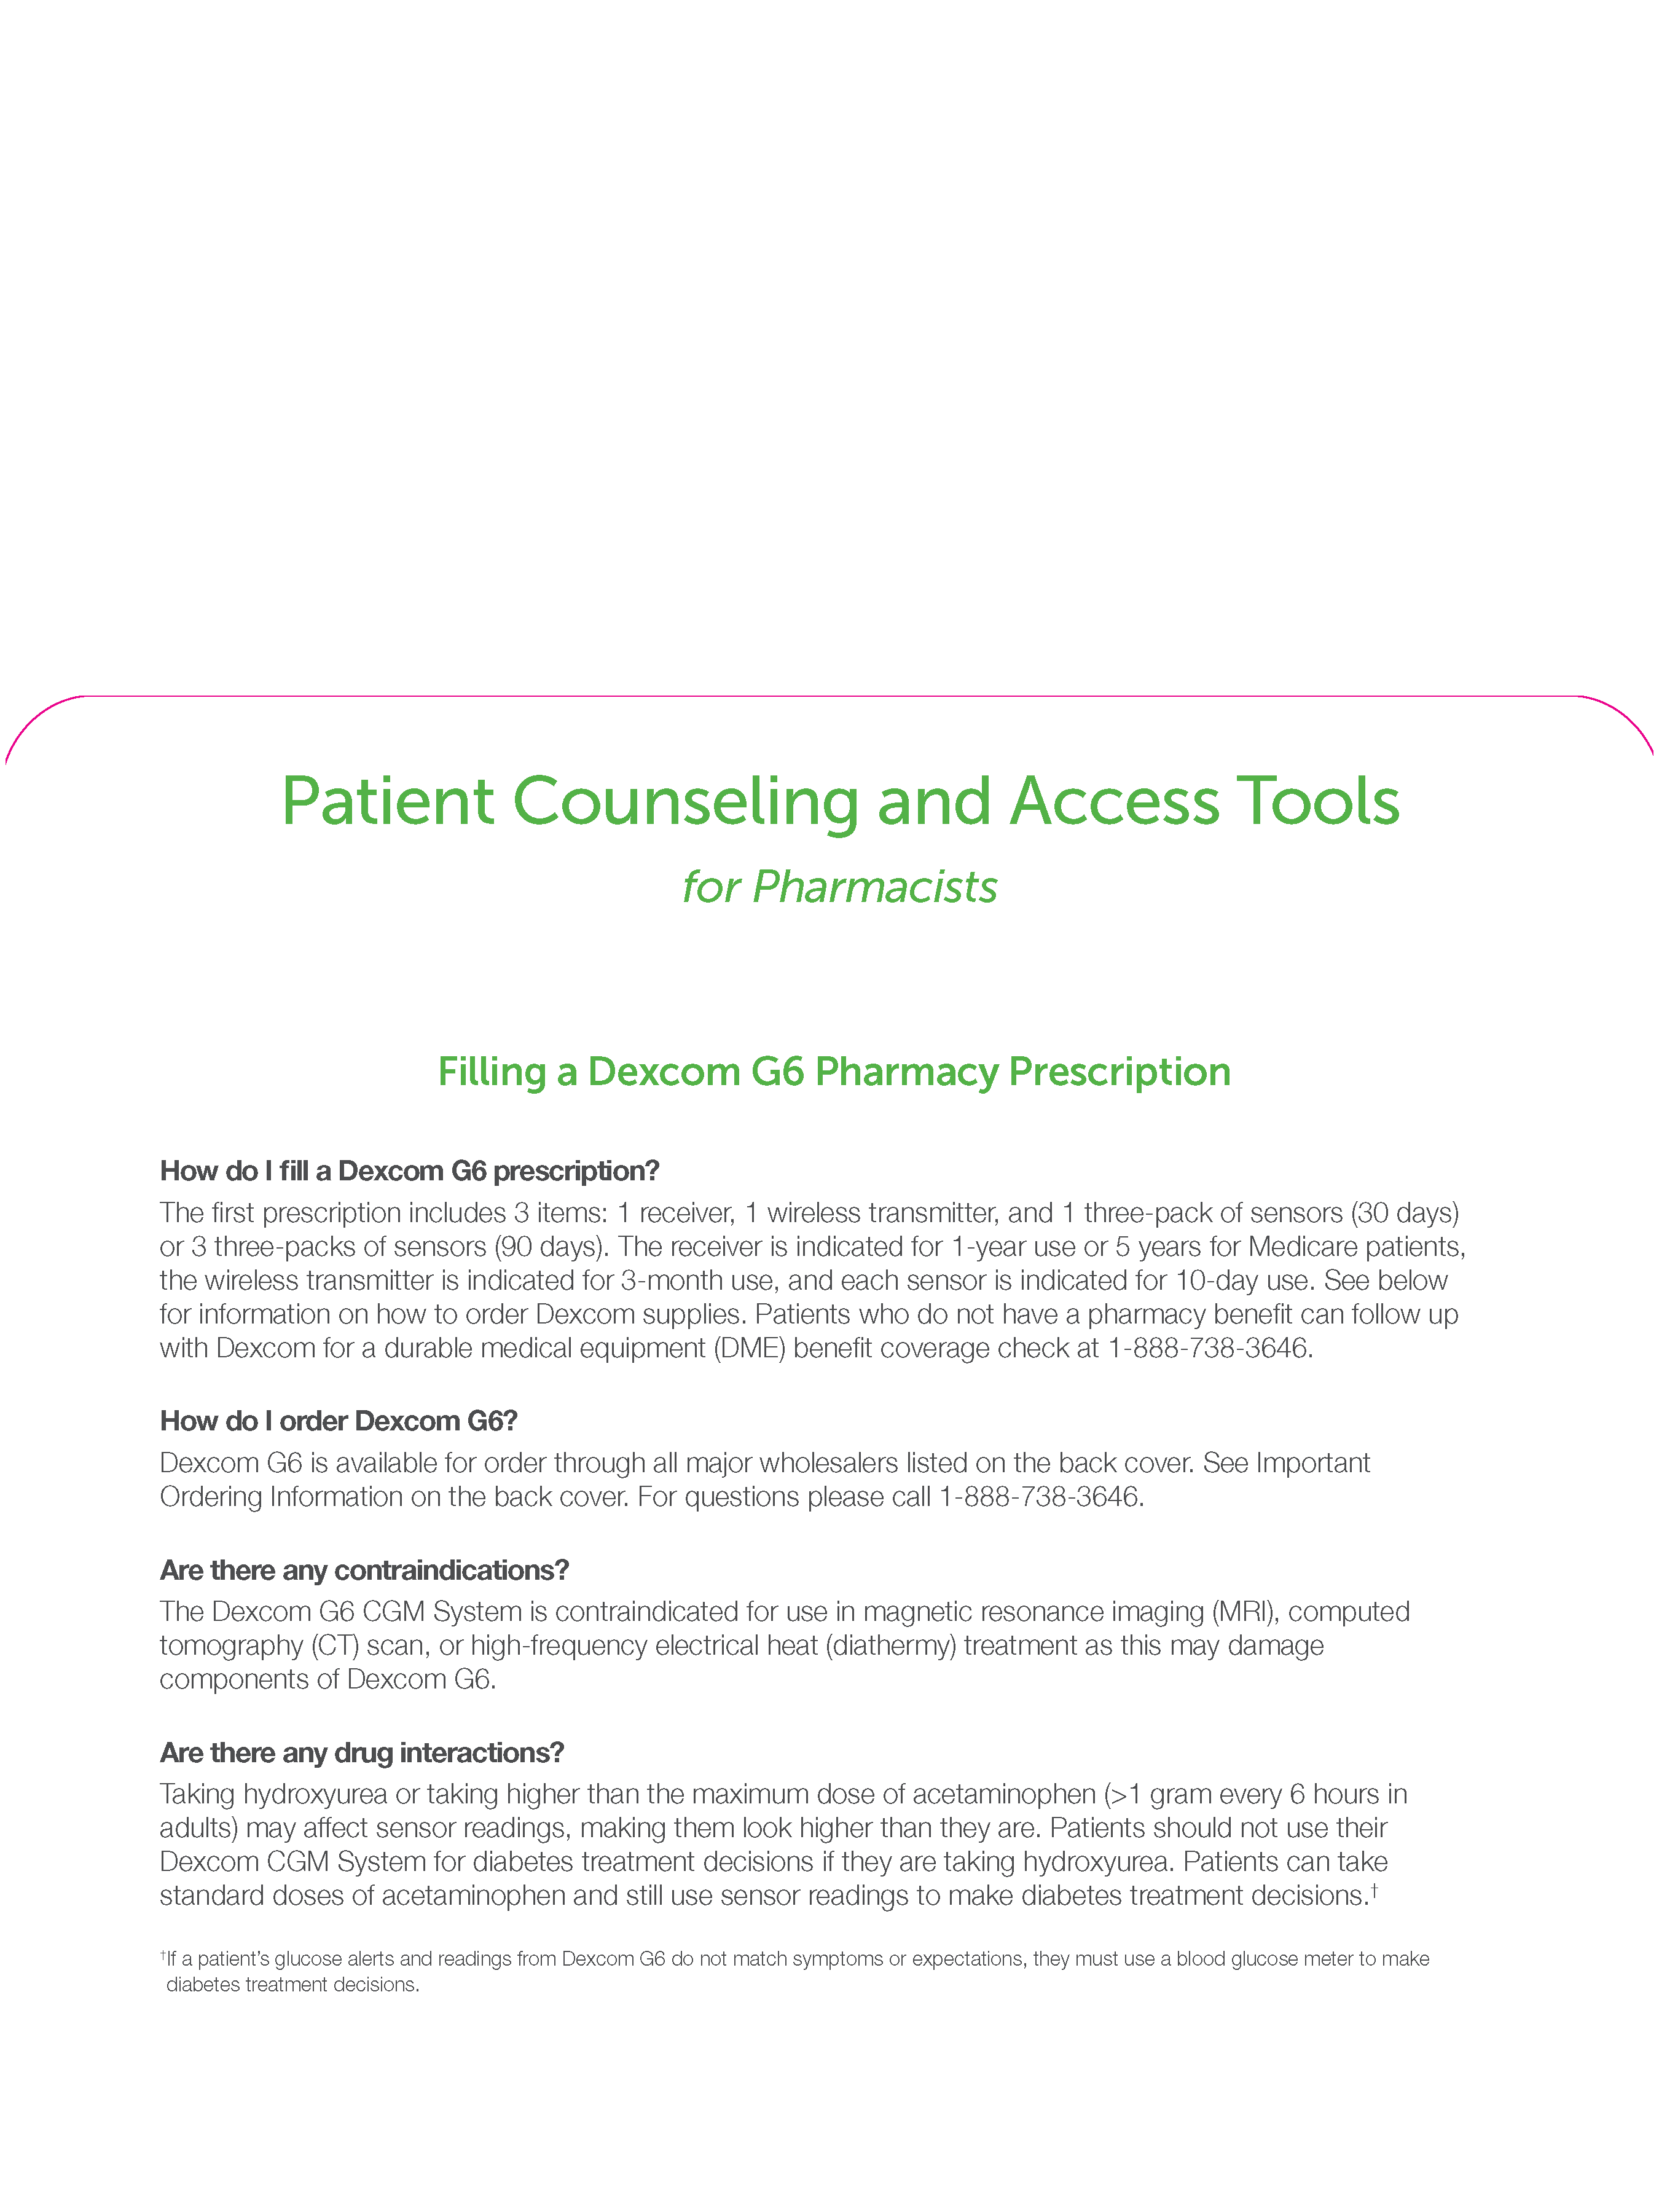 Pharmacist Toolkit PDF edited version_Page_3.png